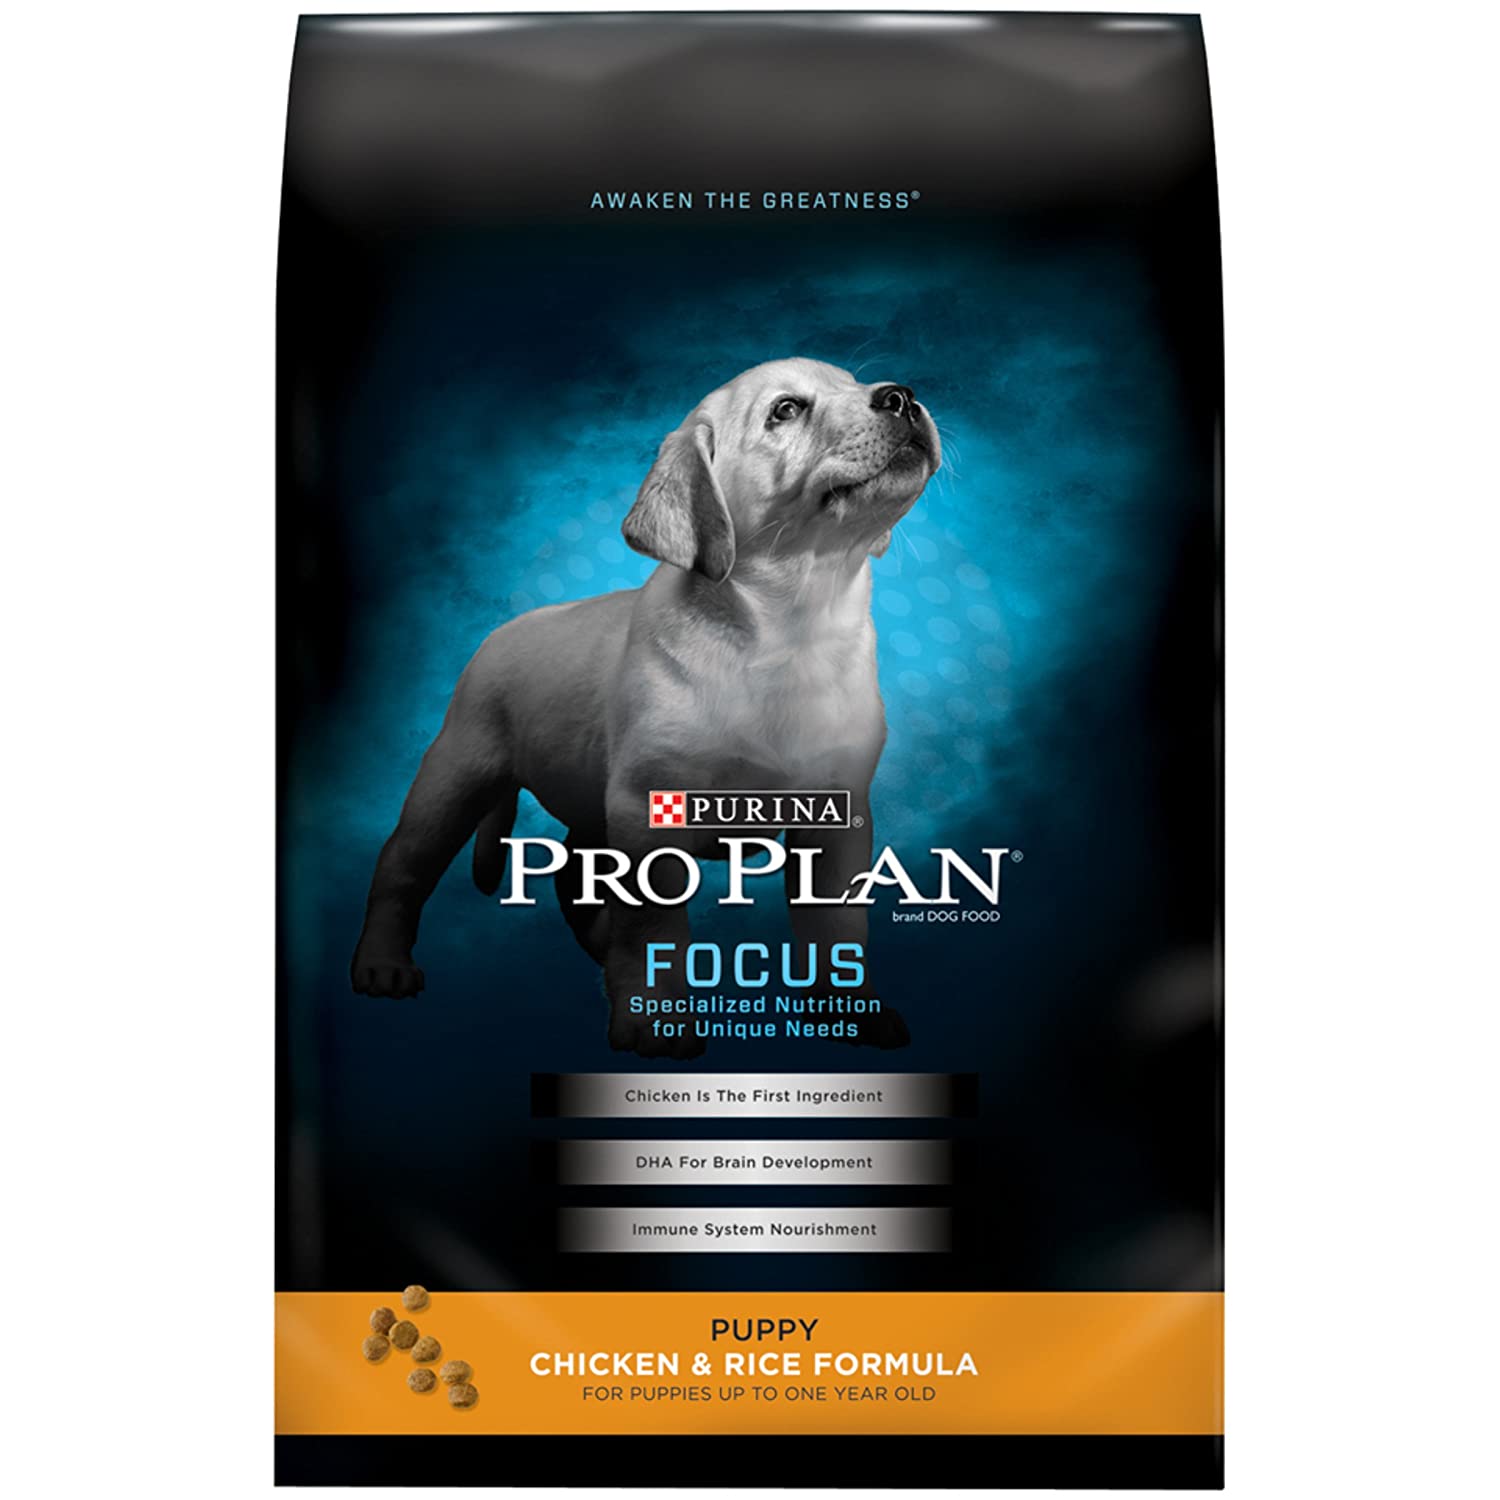 Best Dog Food for Pitbull Puppies